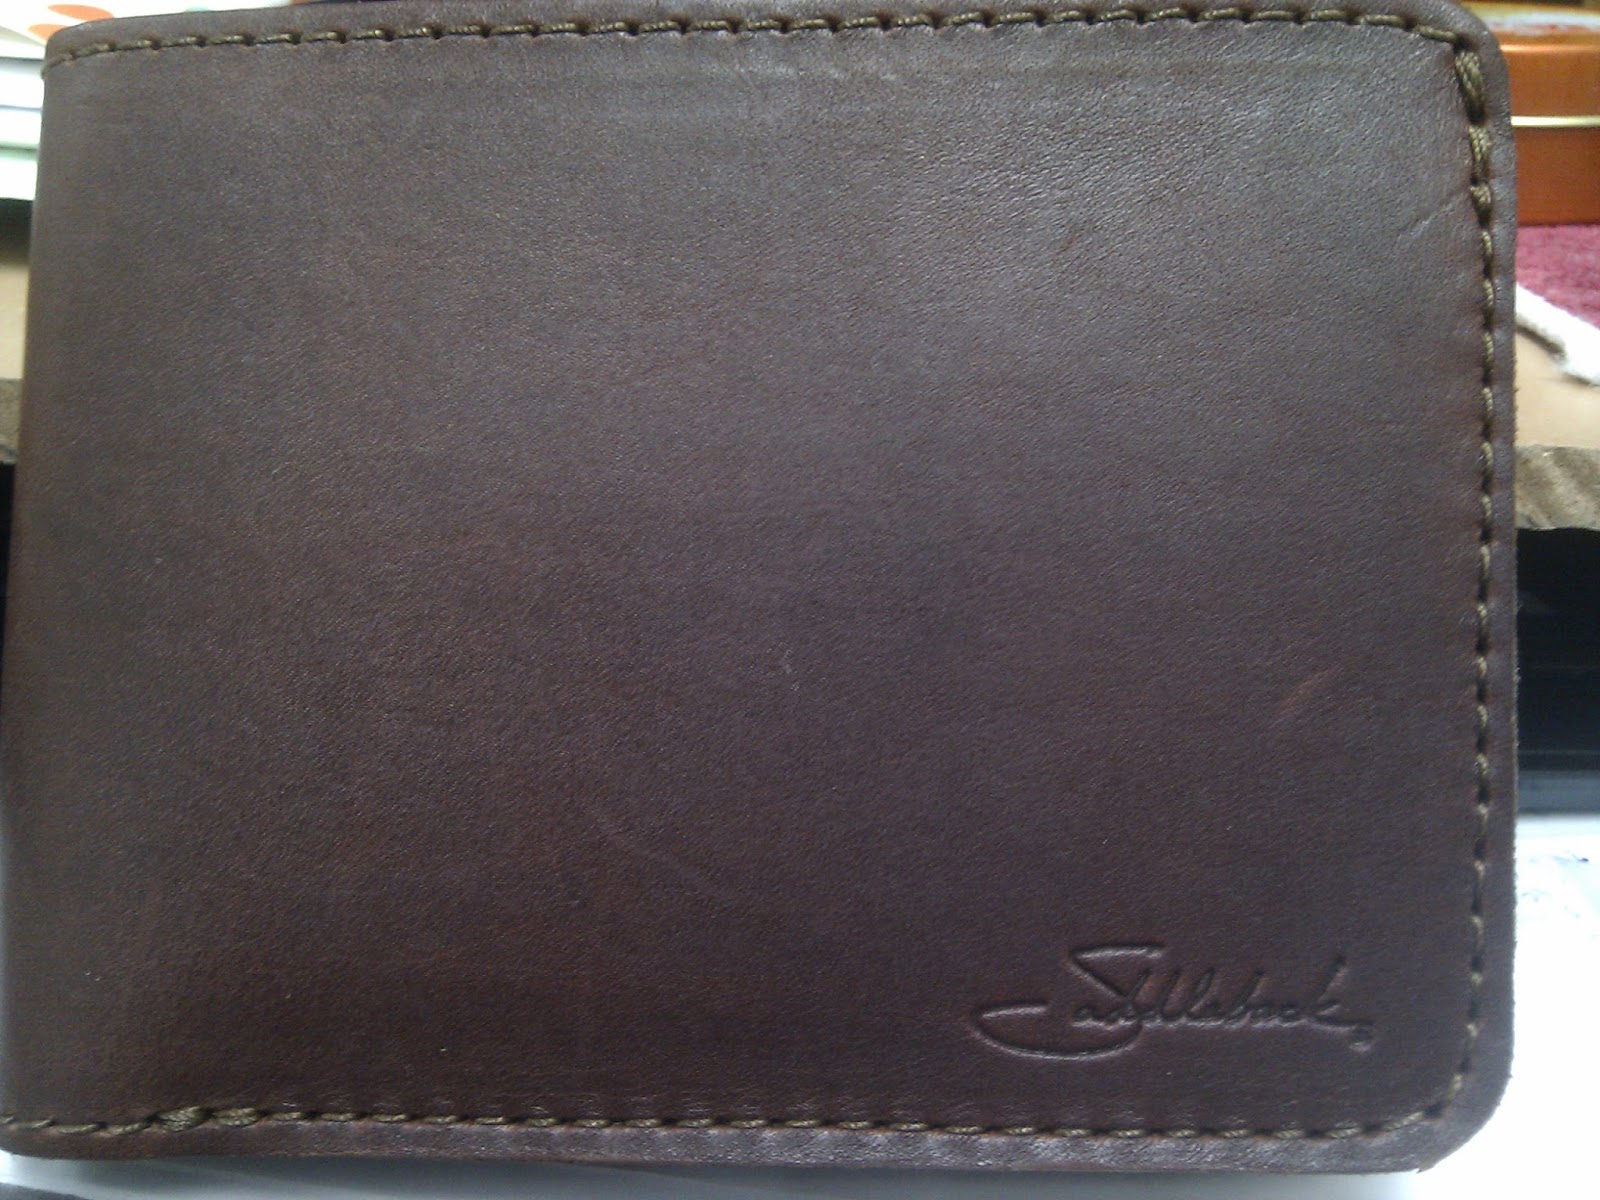 myGearReview42: Review: Saddleback Leather Medium Bifold Wallet in Chestnut